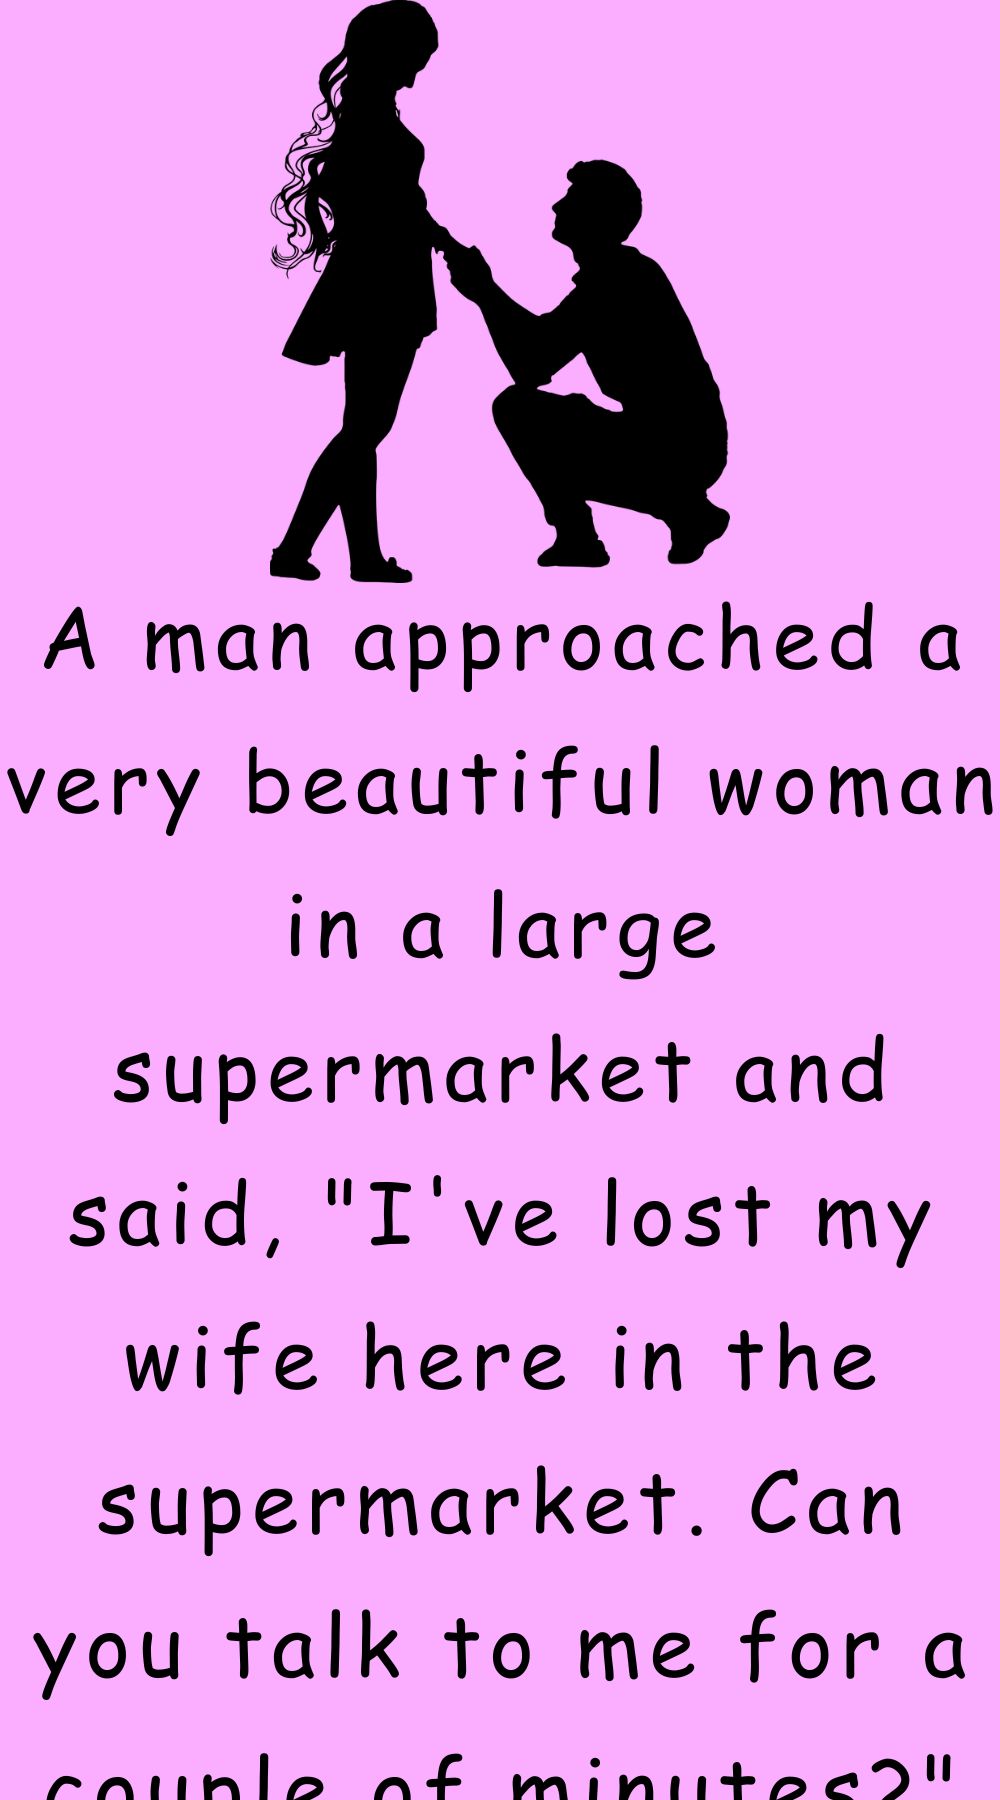 A man approached a very beautiful woman